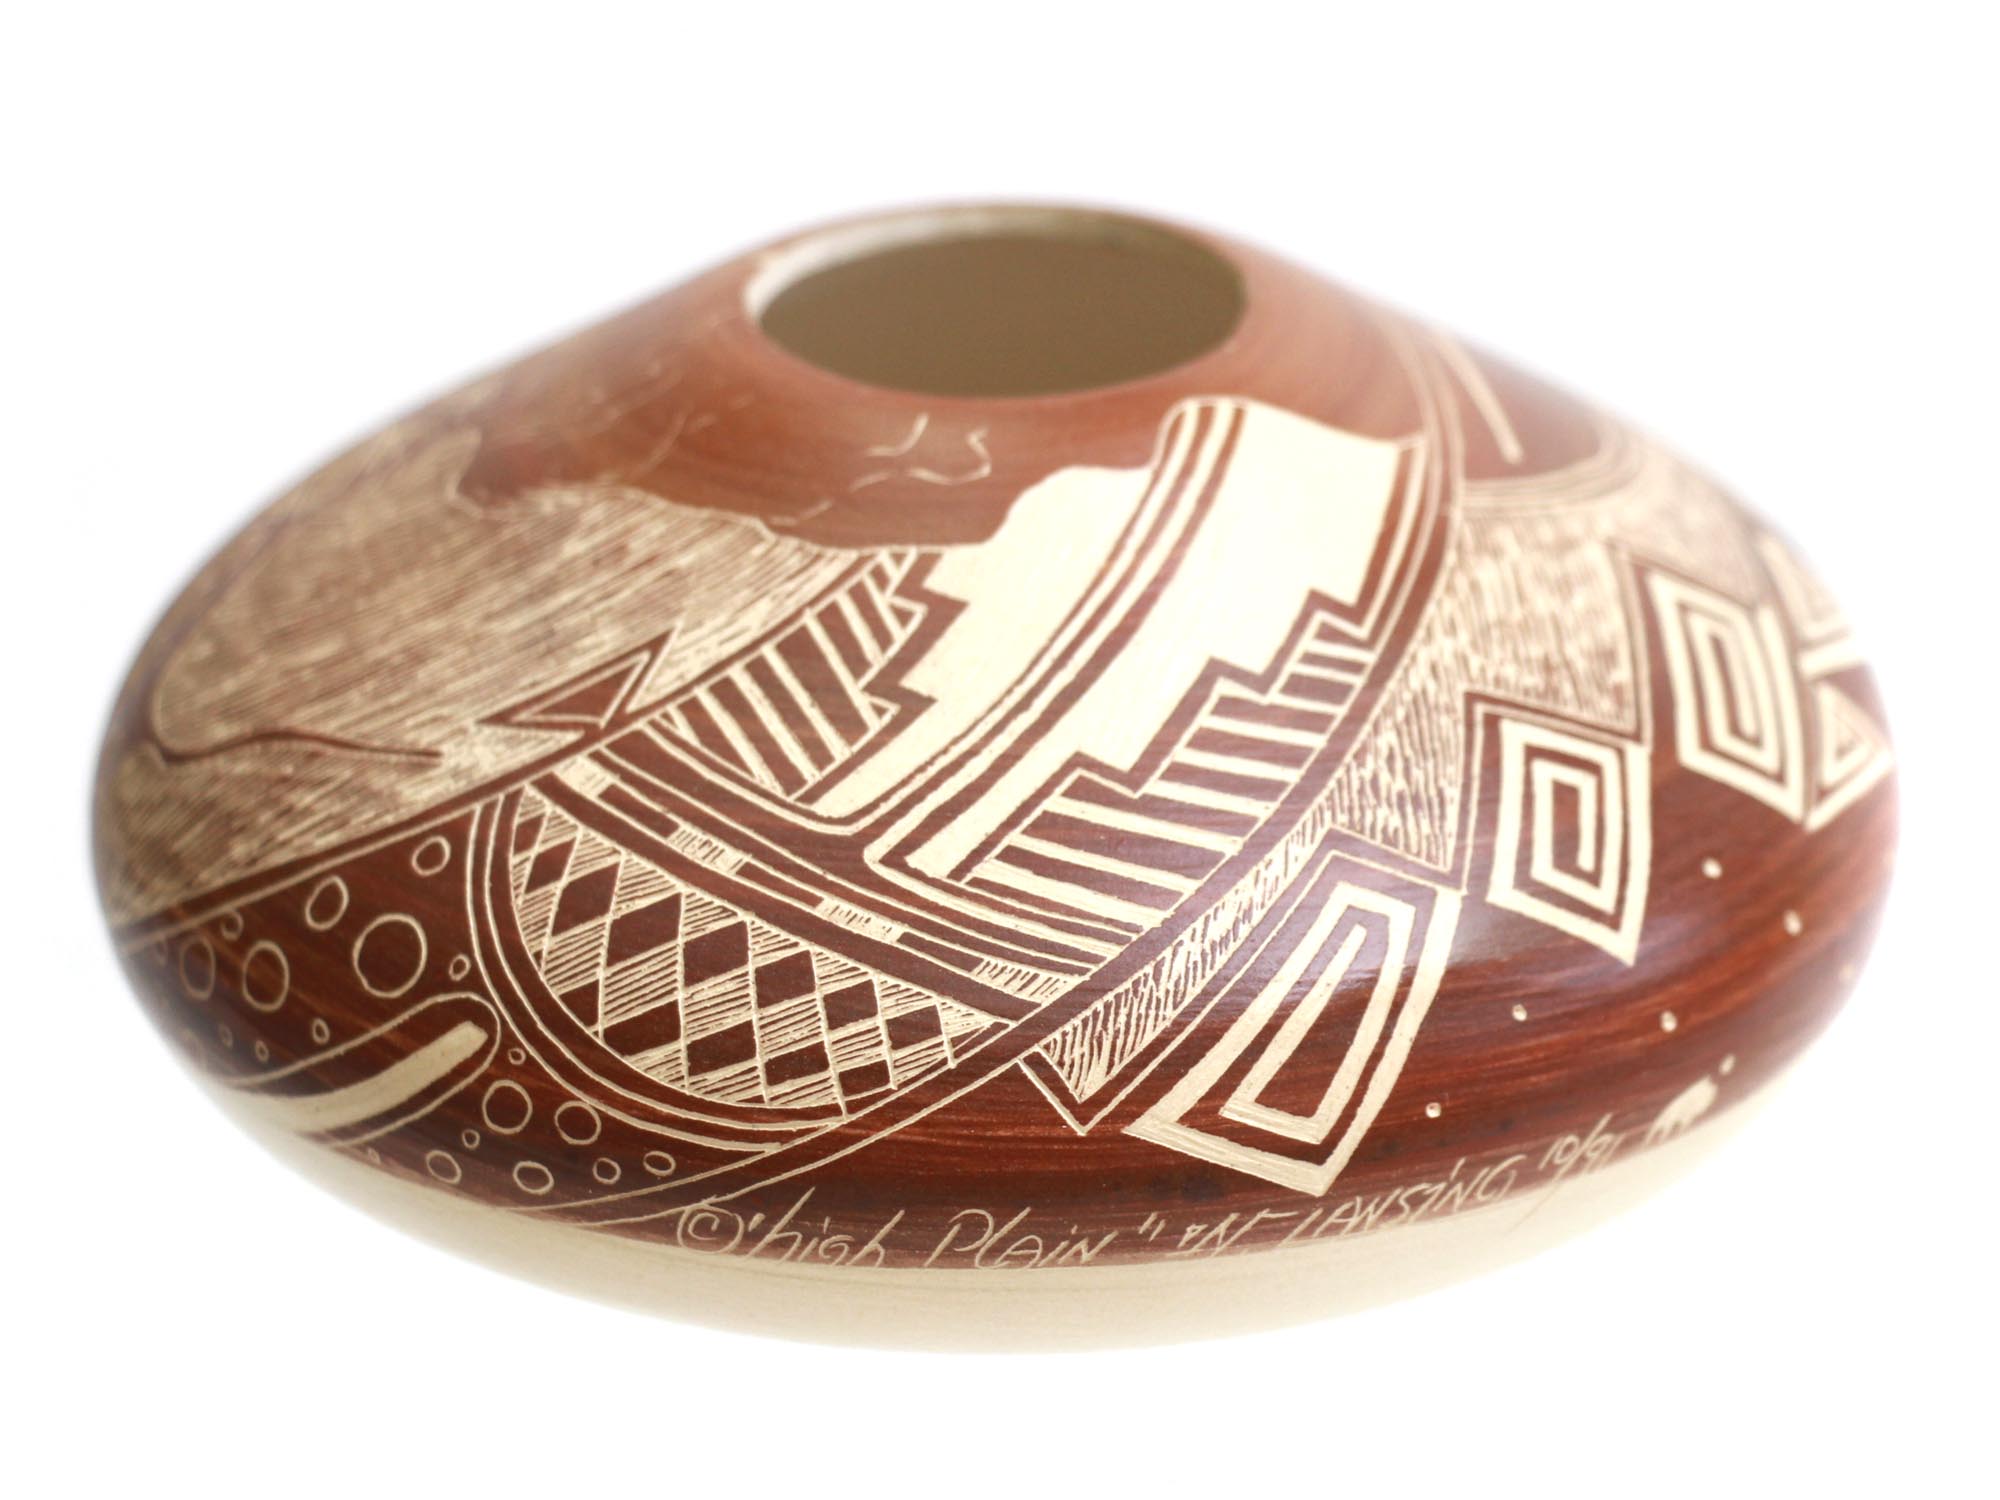 NAVAJO COLLECTION POTTERY VASE BY NORMAN LANSING PIC-0